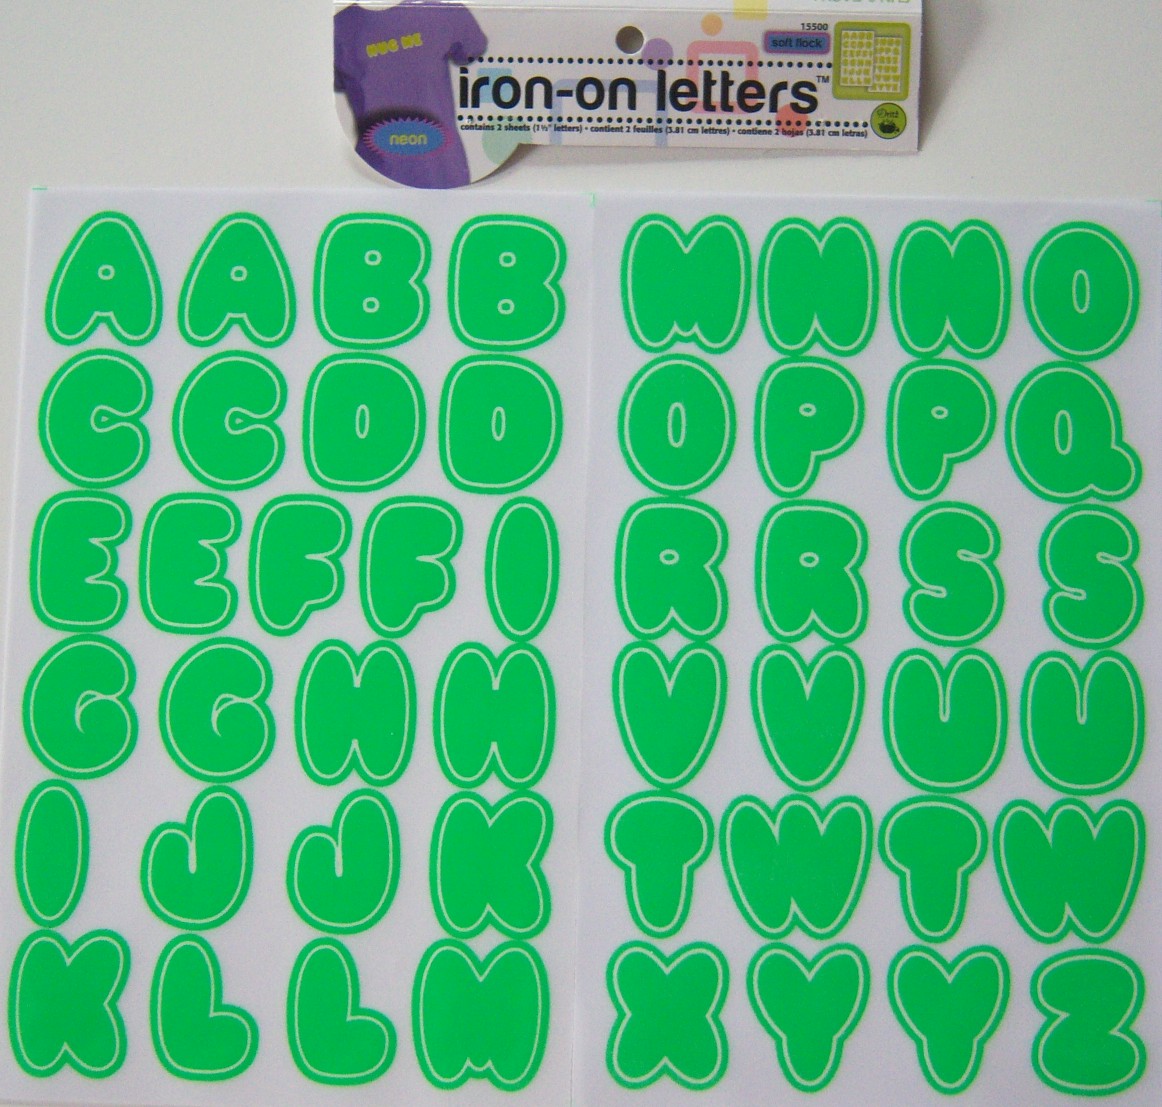 15500 Dritz Neon Green Iron on Letters